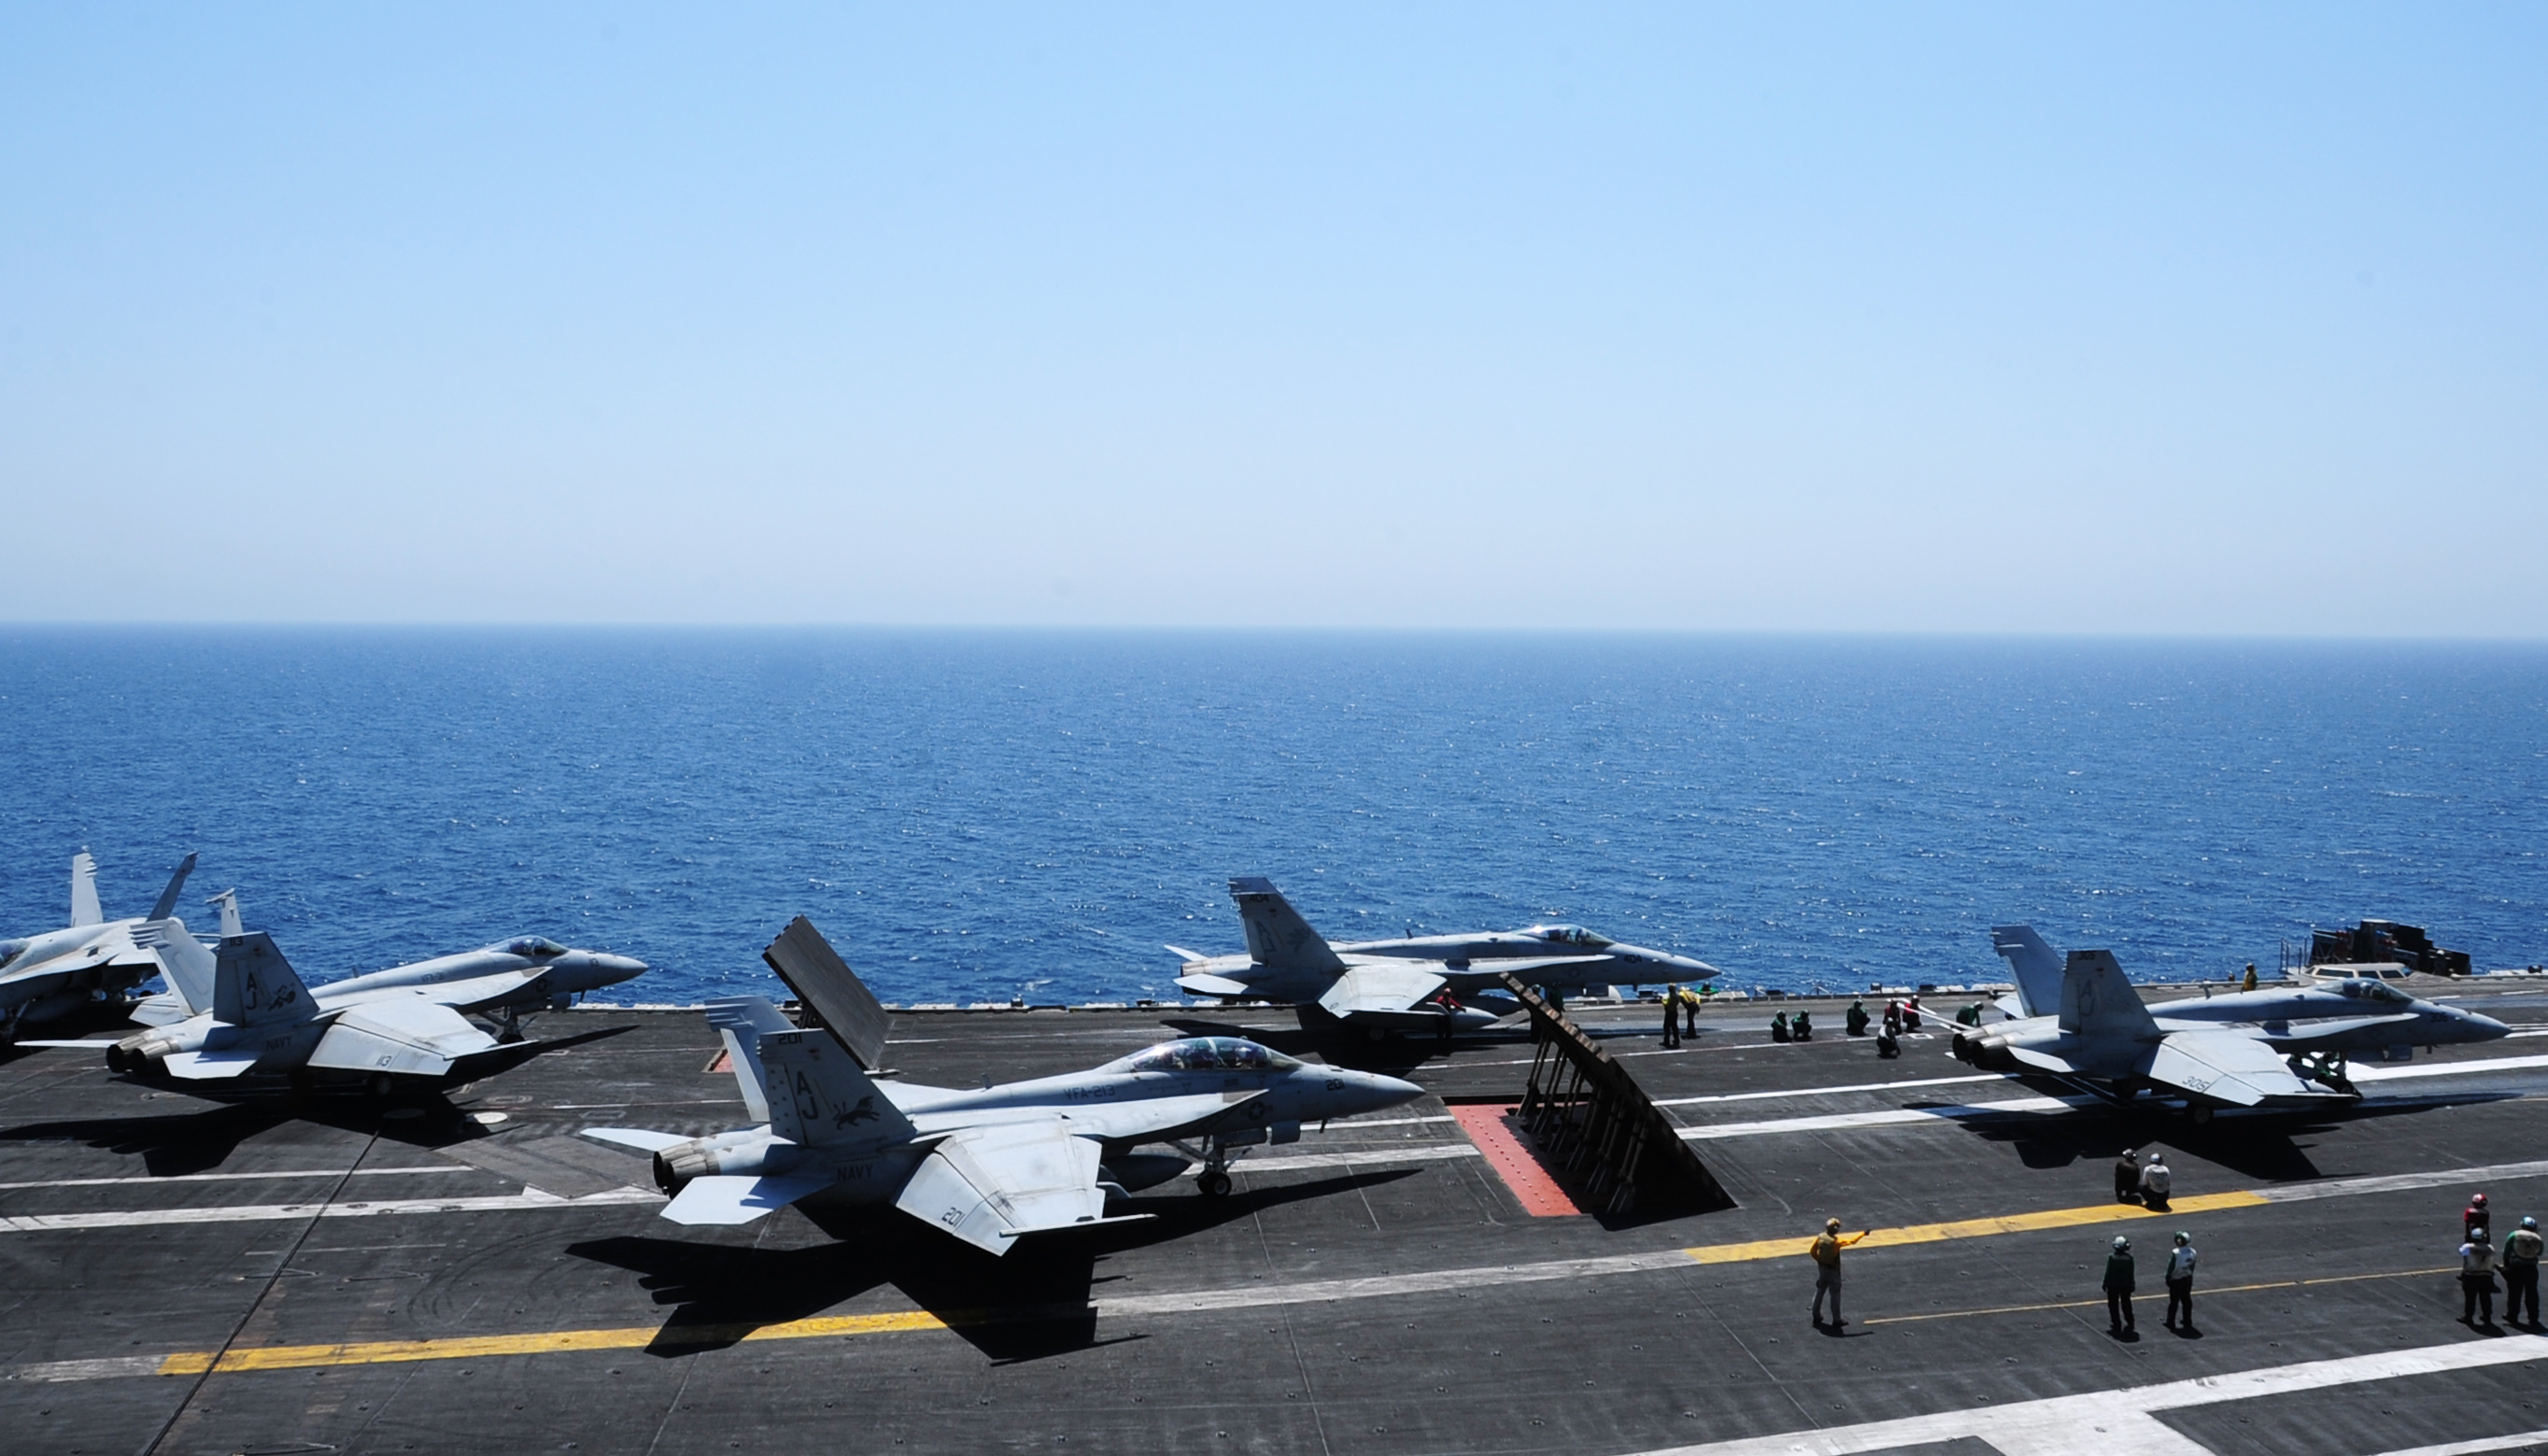 Sailors launch aircraft from the flight deck of the aircraft carrier USS George H.W. Bush (CVN 77) on Aug. 7, 2014. US Navy Photo